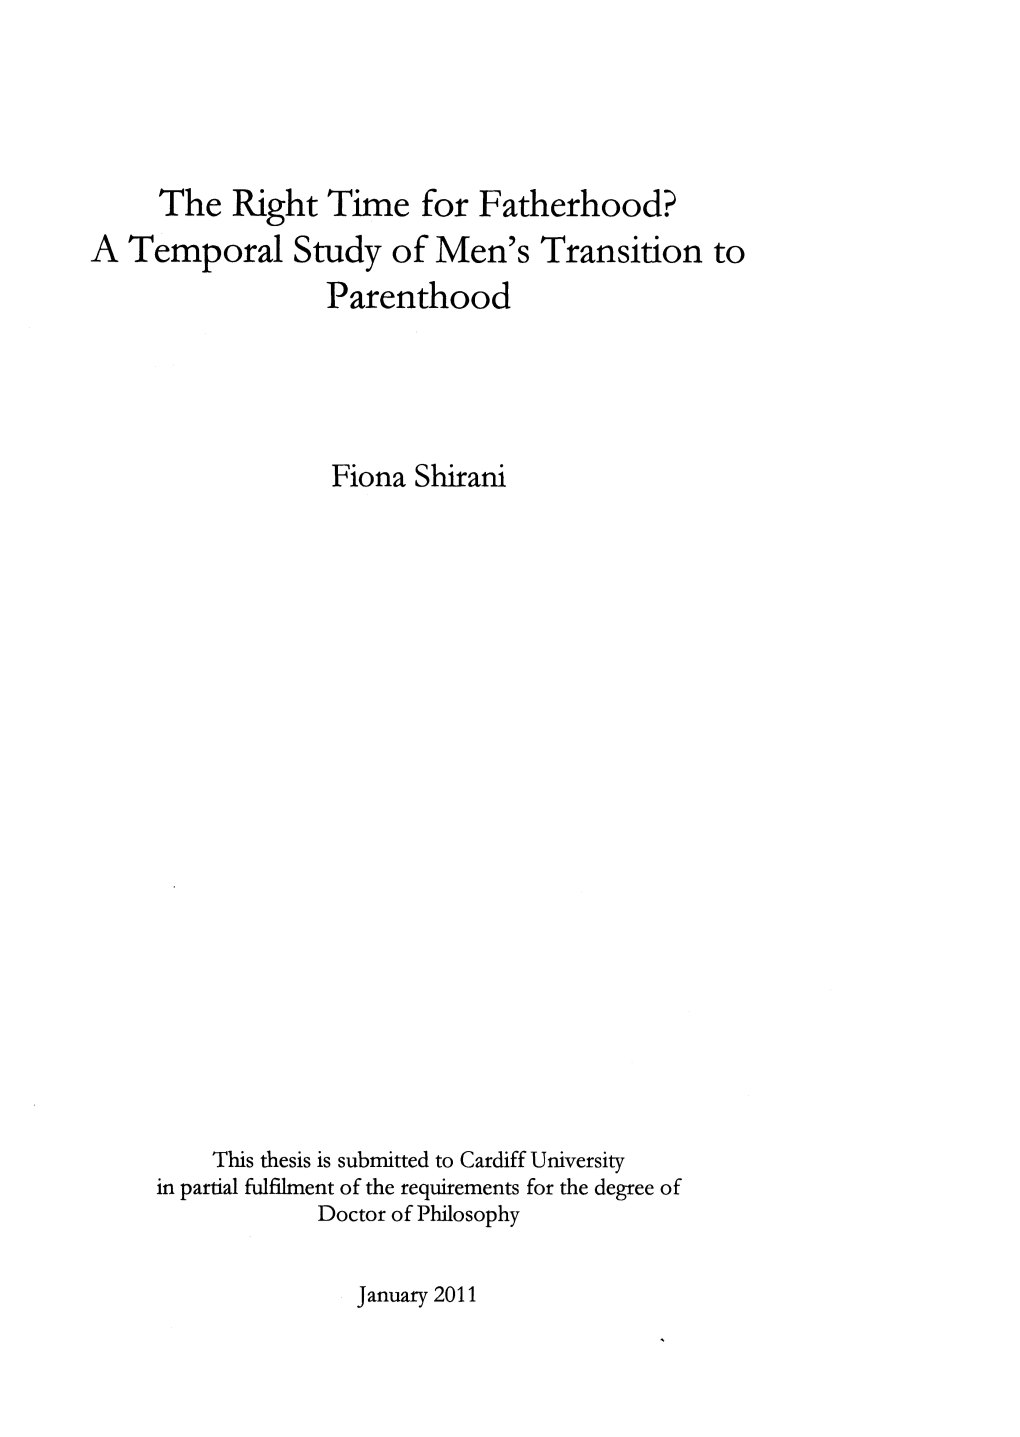 The Right Time for Fatherhood? a Temporal Study of Men's Transition